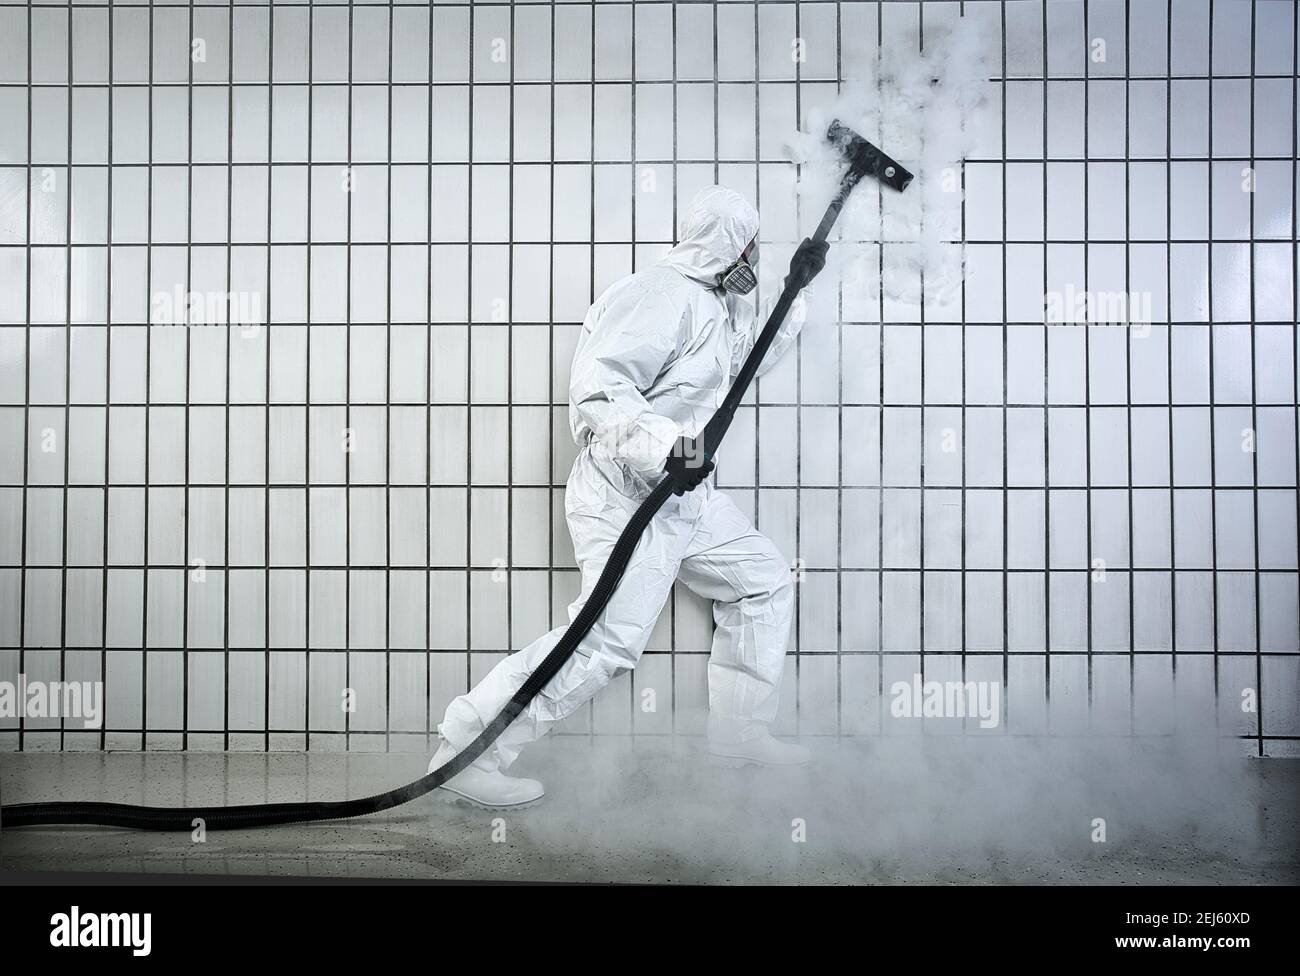 cleaner dry ice cleaning tiles. Stock Photo